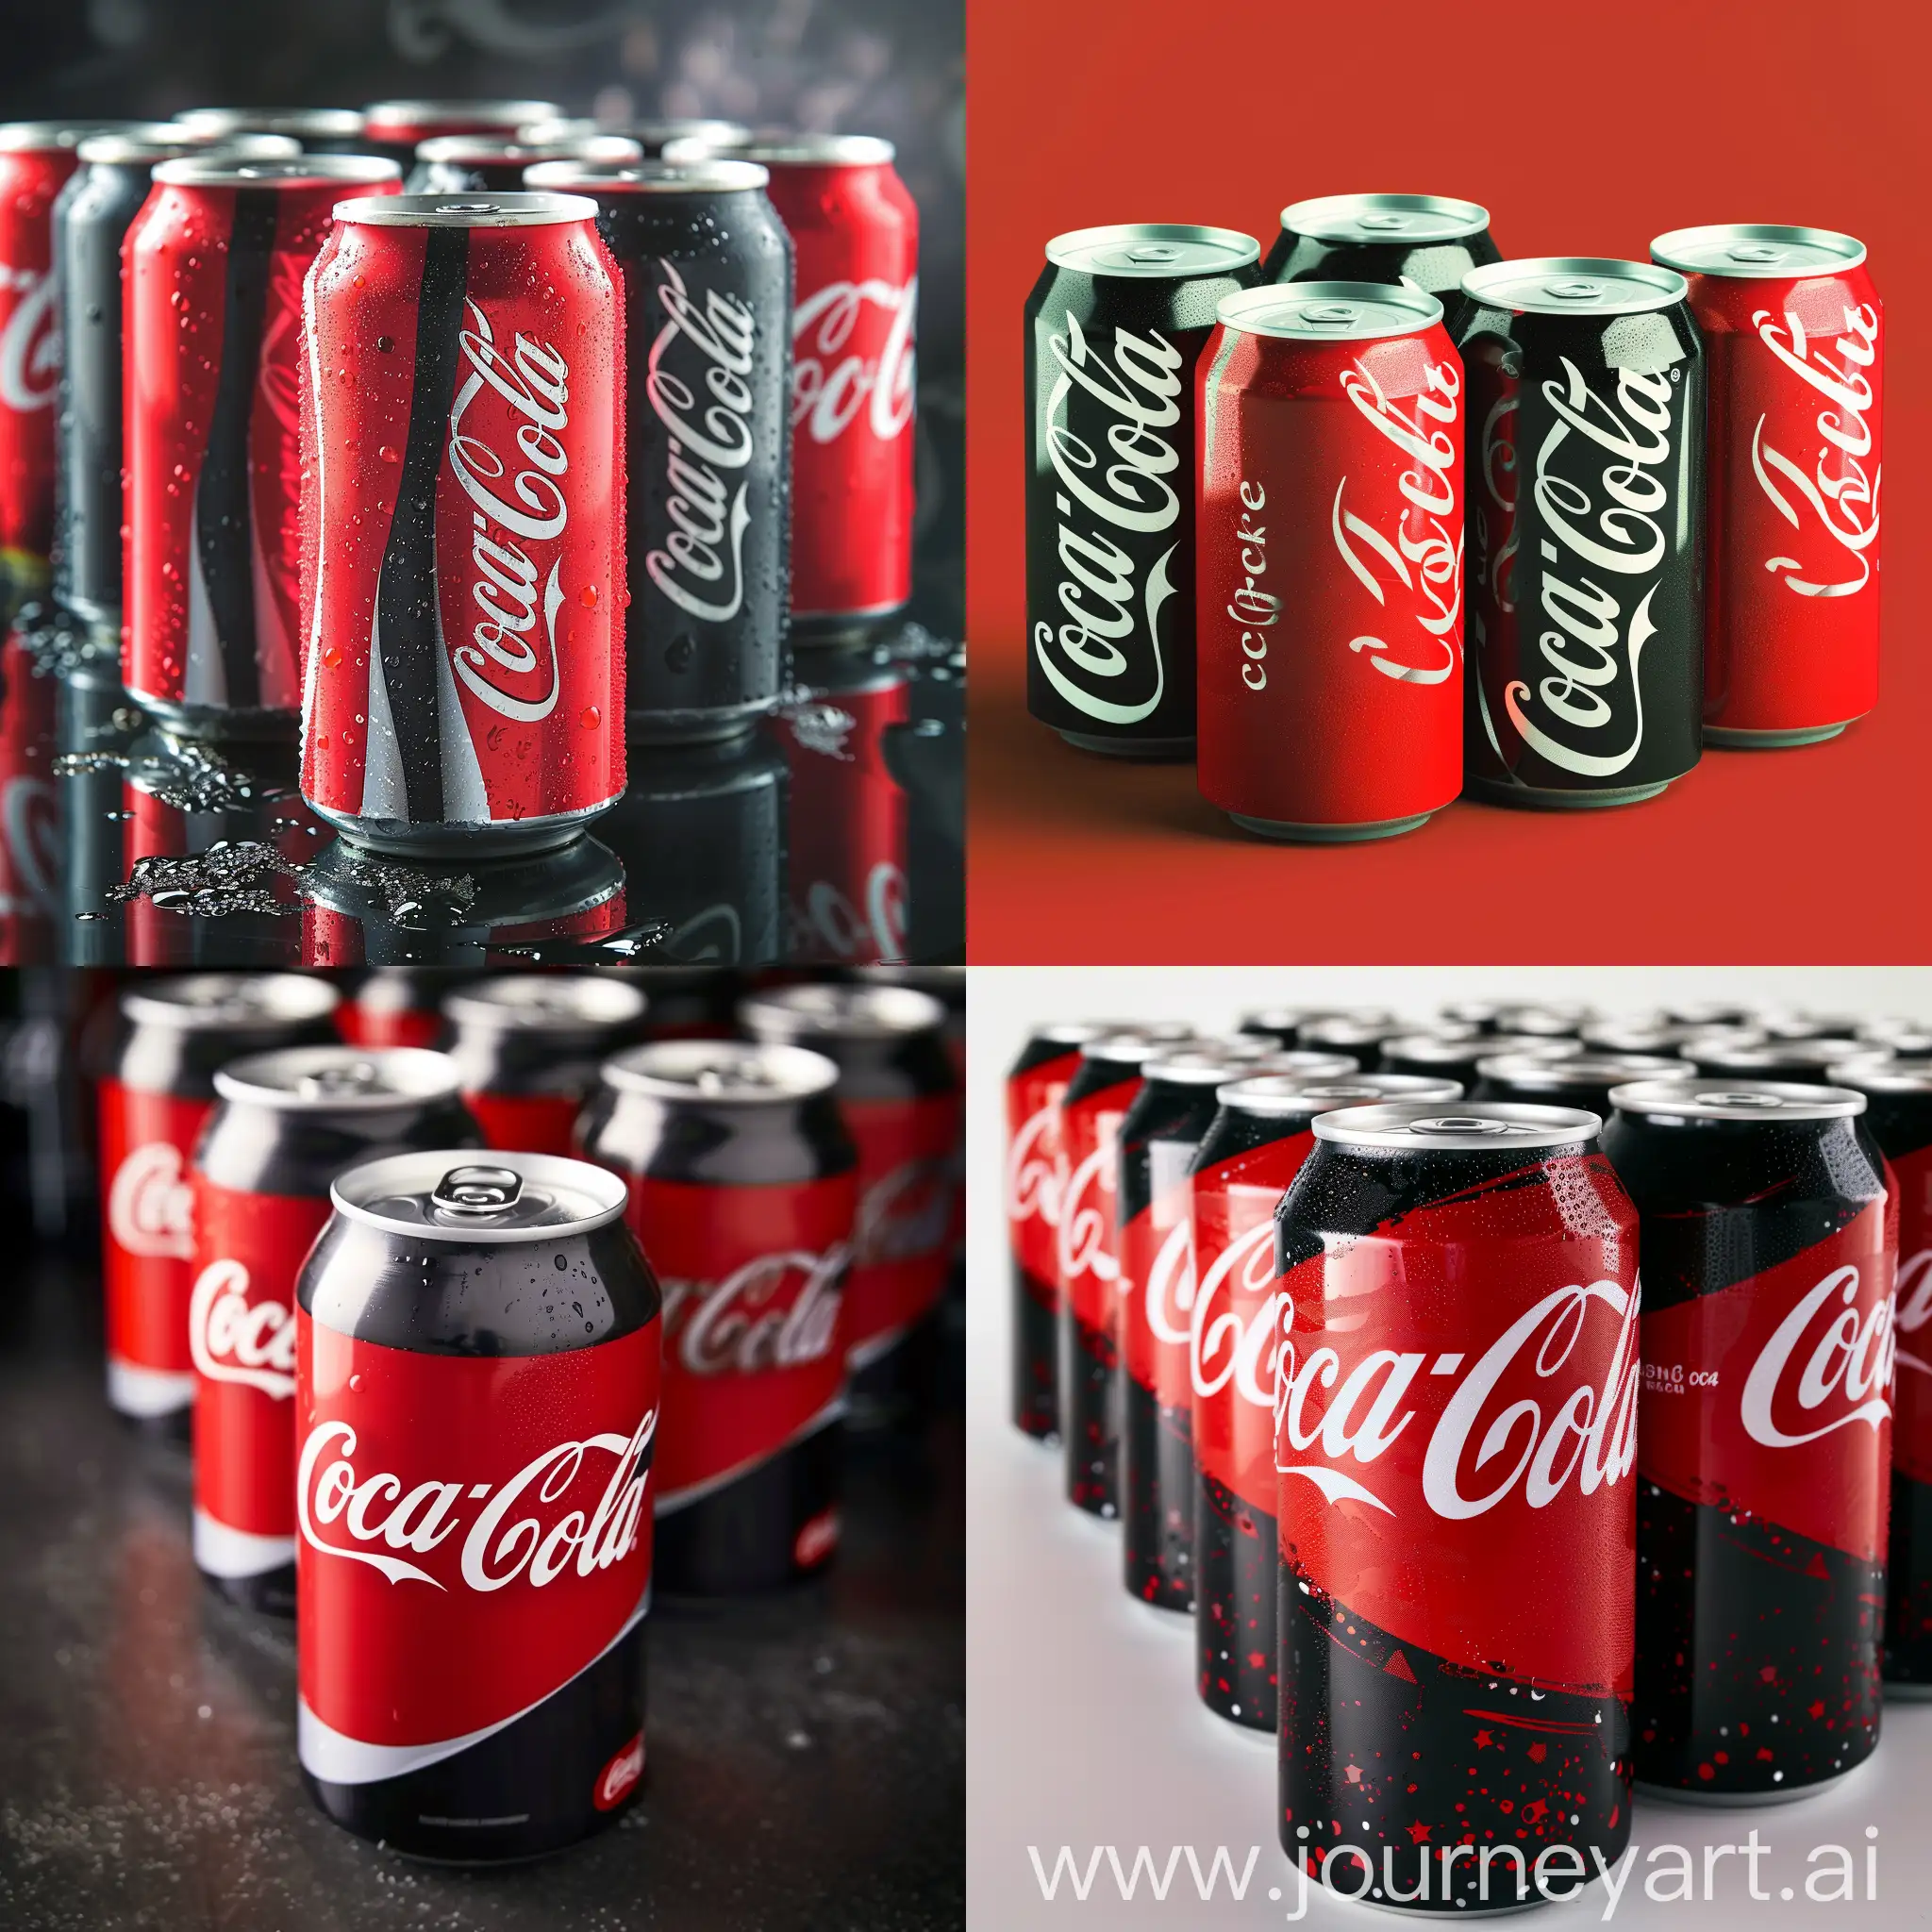 Generate a branding banner to promote coca cola soda including red and black cans